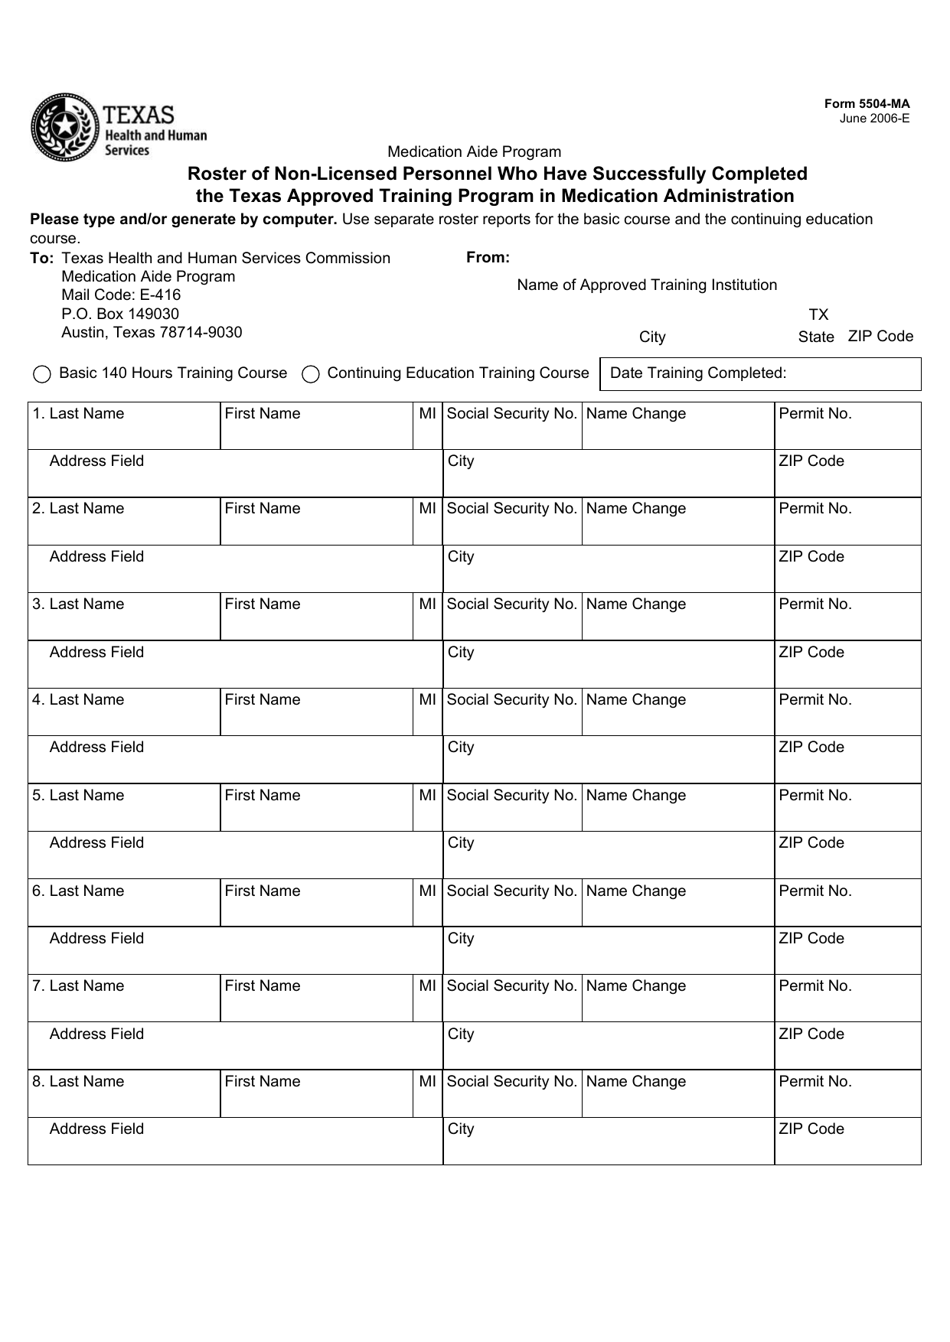 Form 5504-MA Roster of Non-licensed Personnel Who Have Successfully Completed the Texas Approved Training Program in Medication Administration - Texas, Page 1